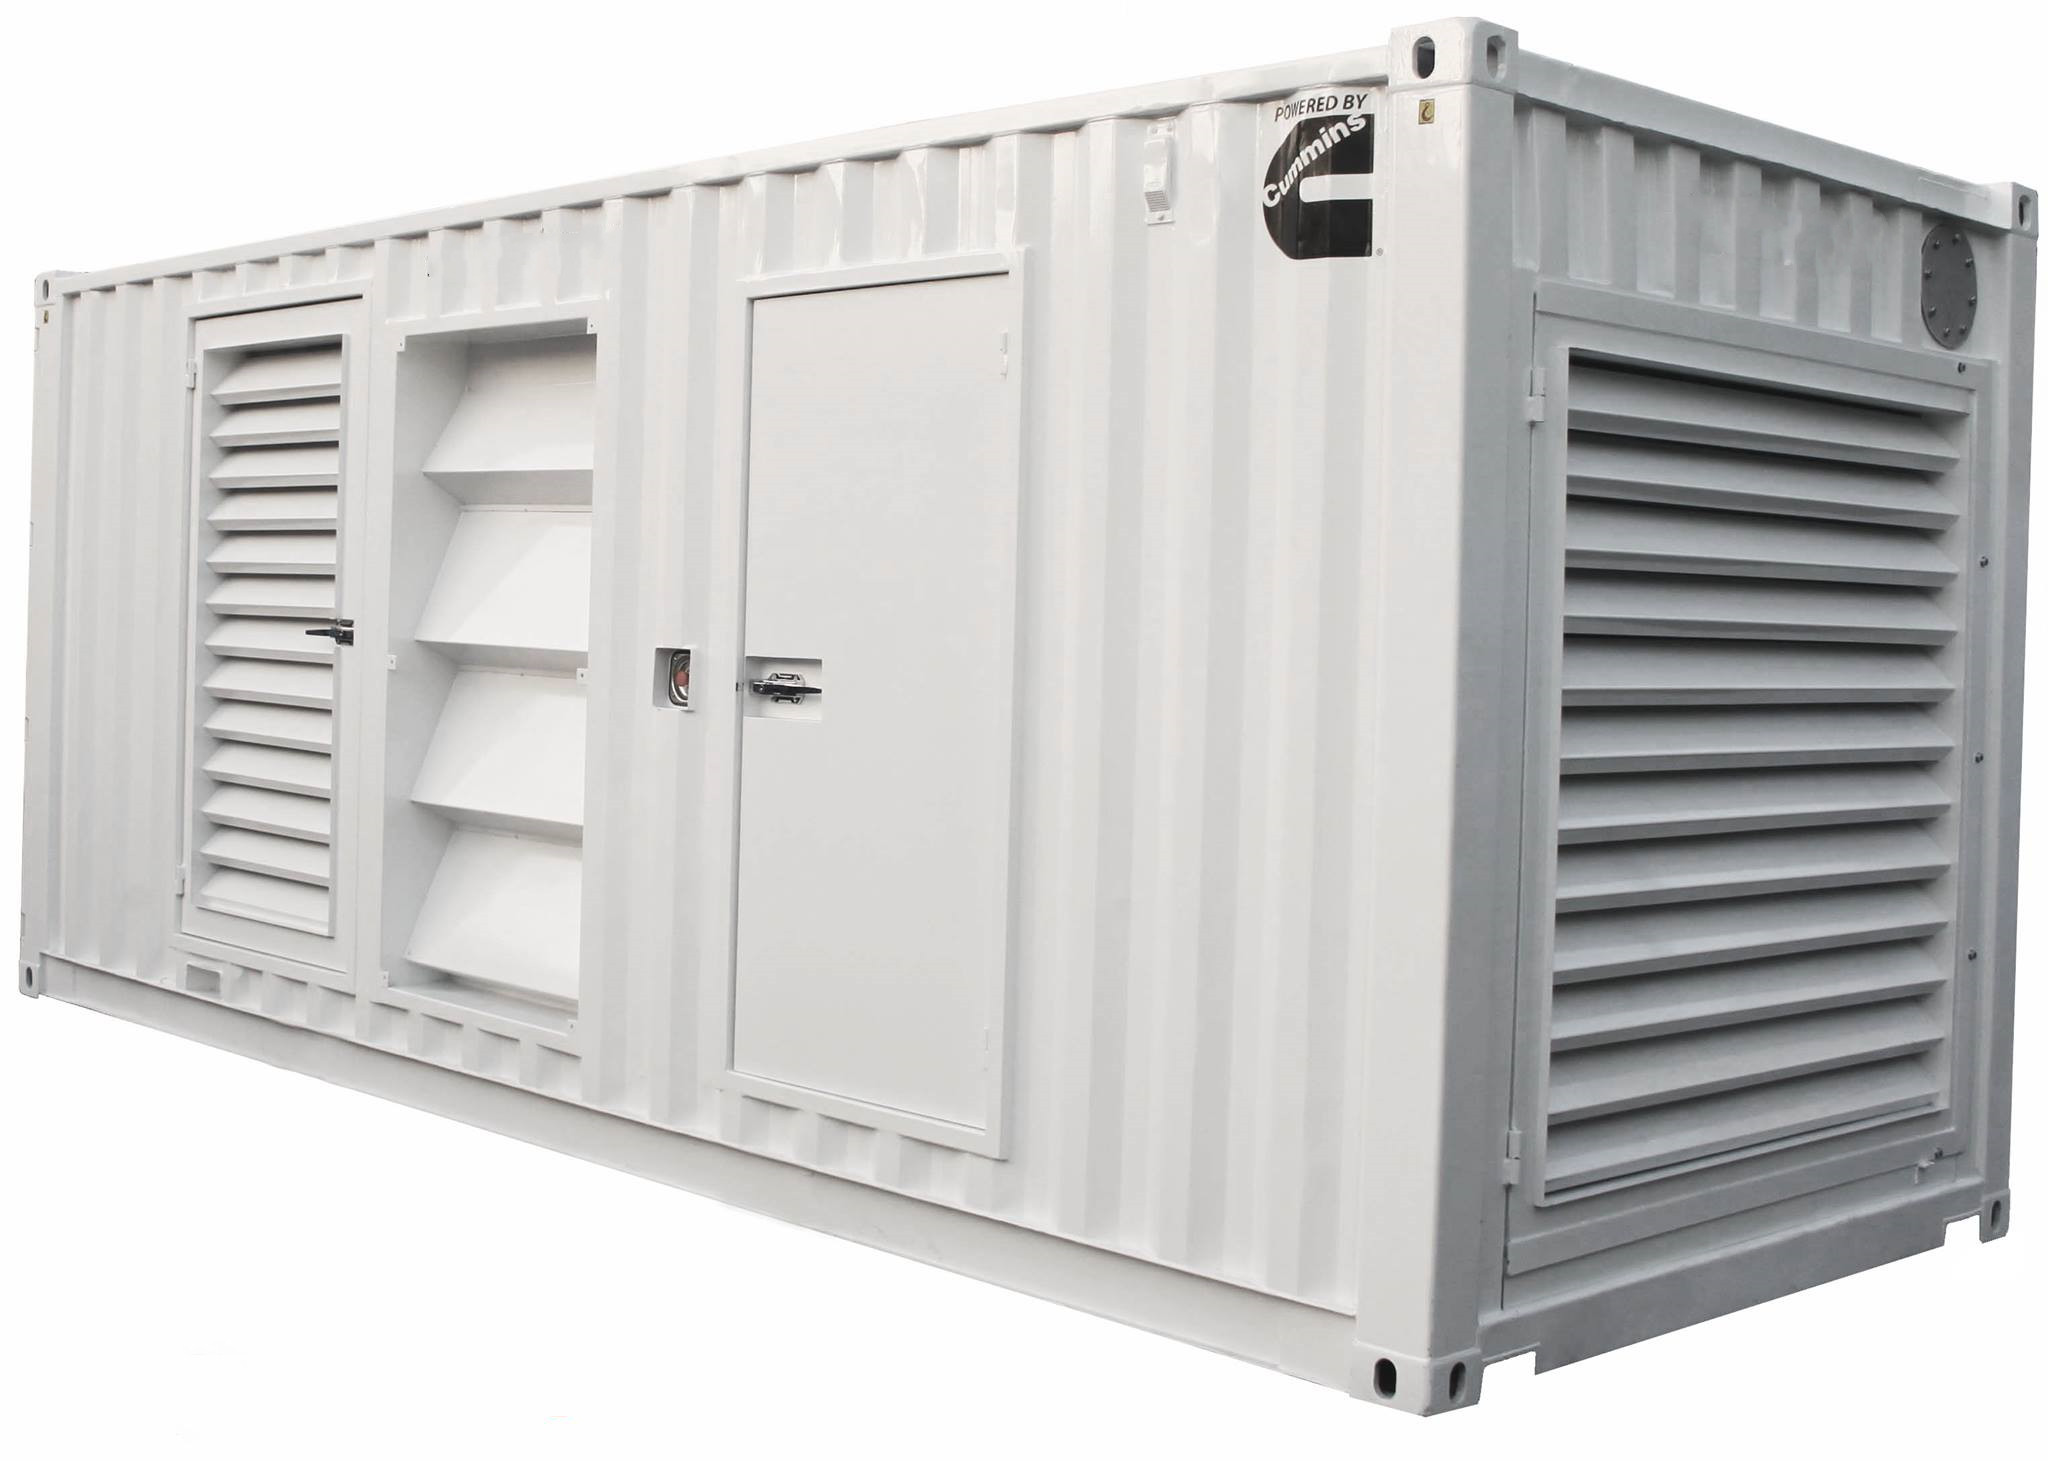 Container 1000KW Mega Silent Generator Diesel Electricity Generation